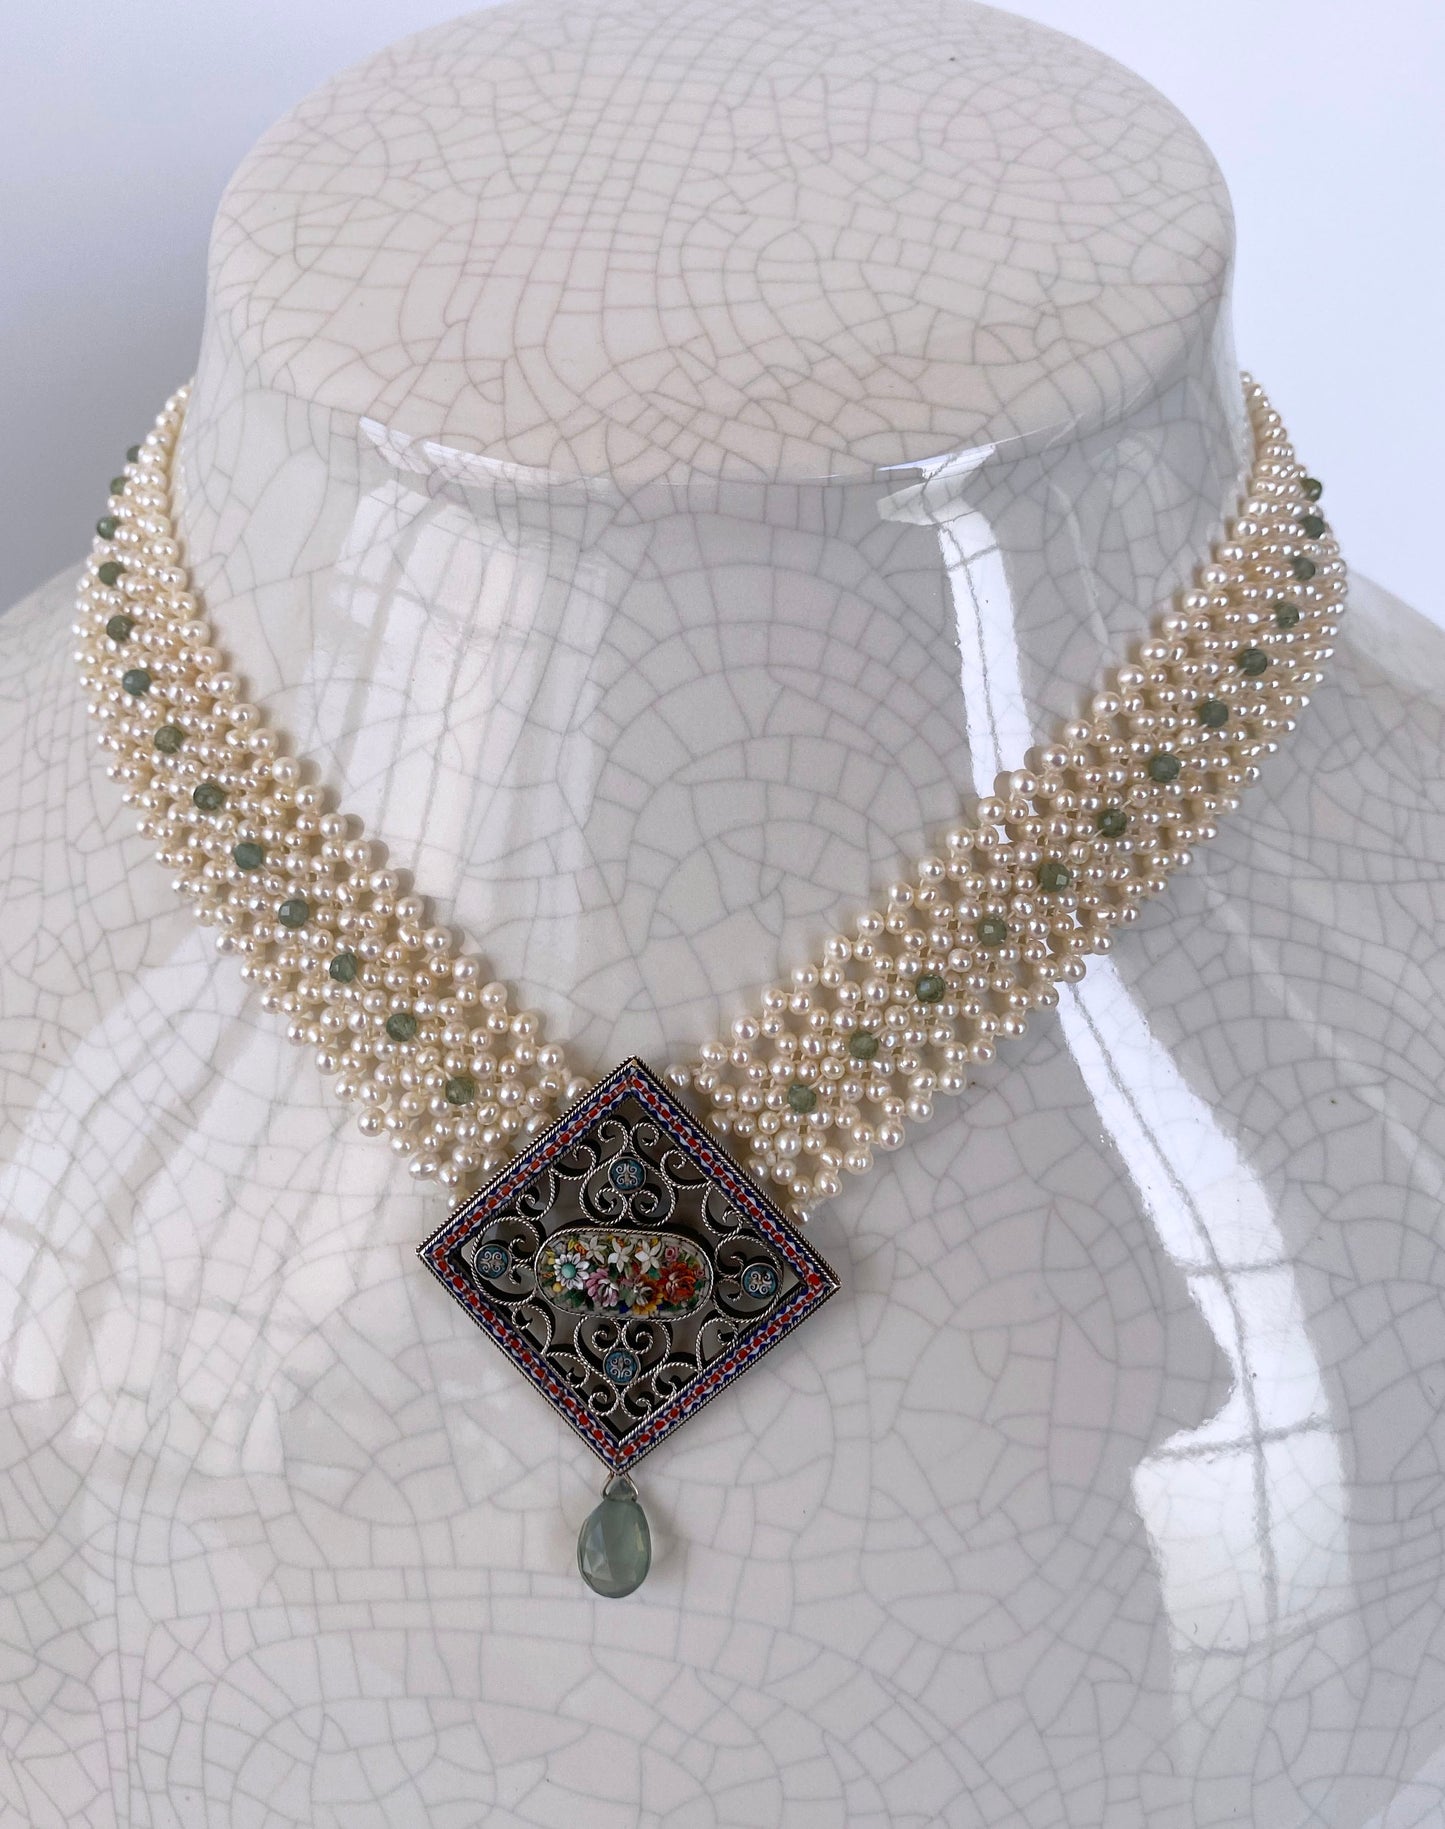 One of a kind Woven Pearl Necklace with Vintage Mosaic Centerpiece Status: Published - Marketplace